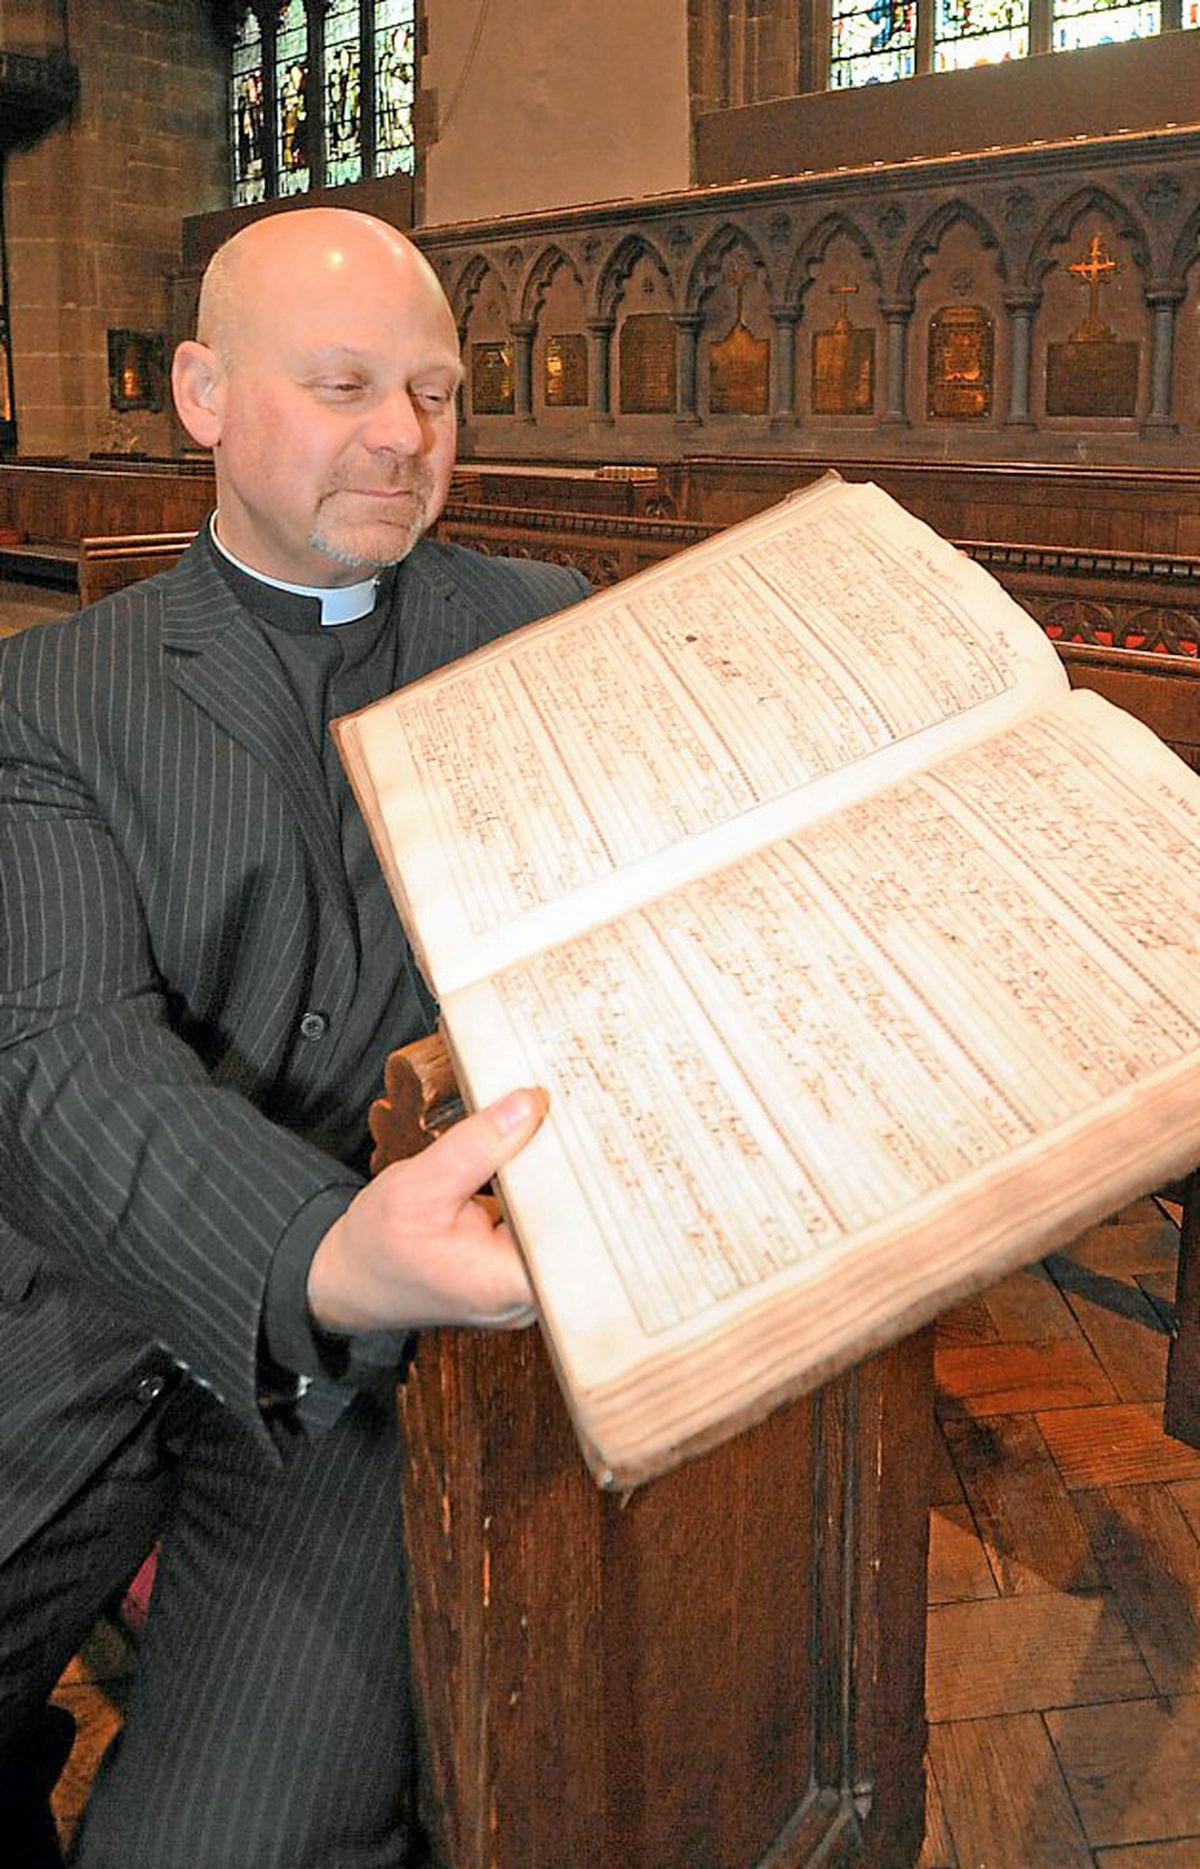 Rector of St Peter's Church in Wolverhampton, the Rev David Wright, looks at the record of Button Gwinnett's marriage to Ann